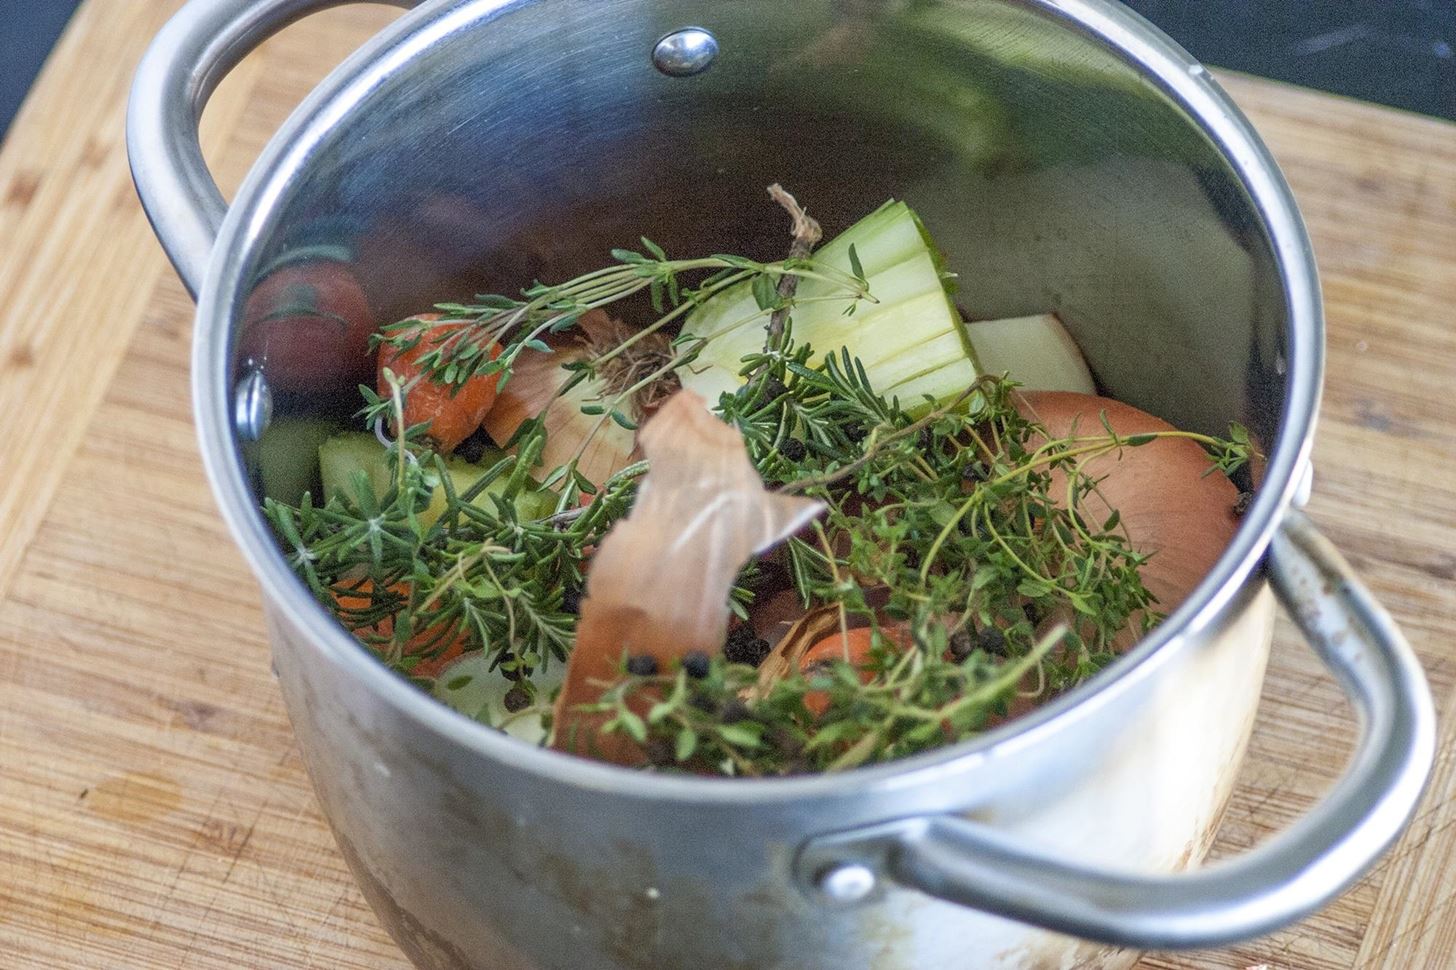 Save All Your Veggie Scraps & You'll Never Buy Stock Again